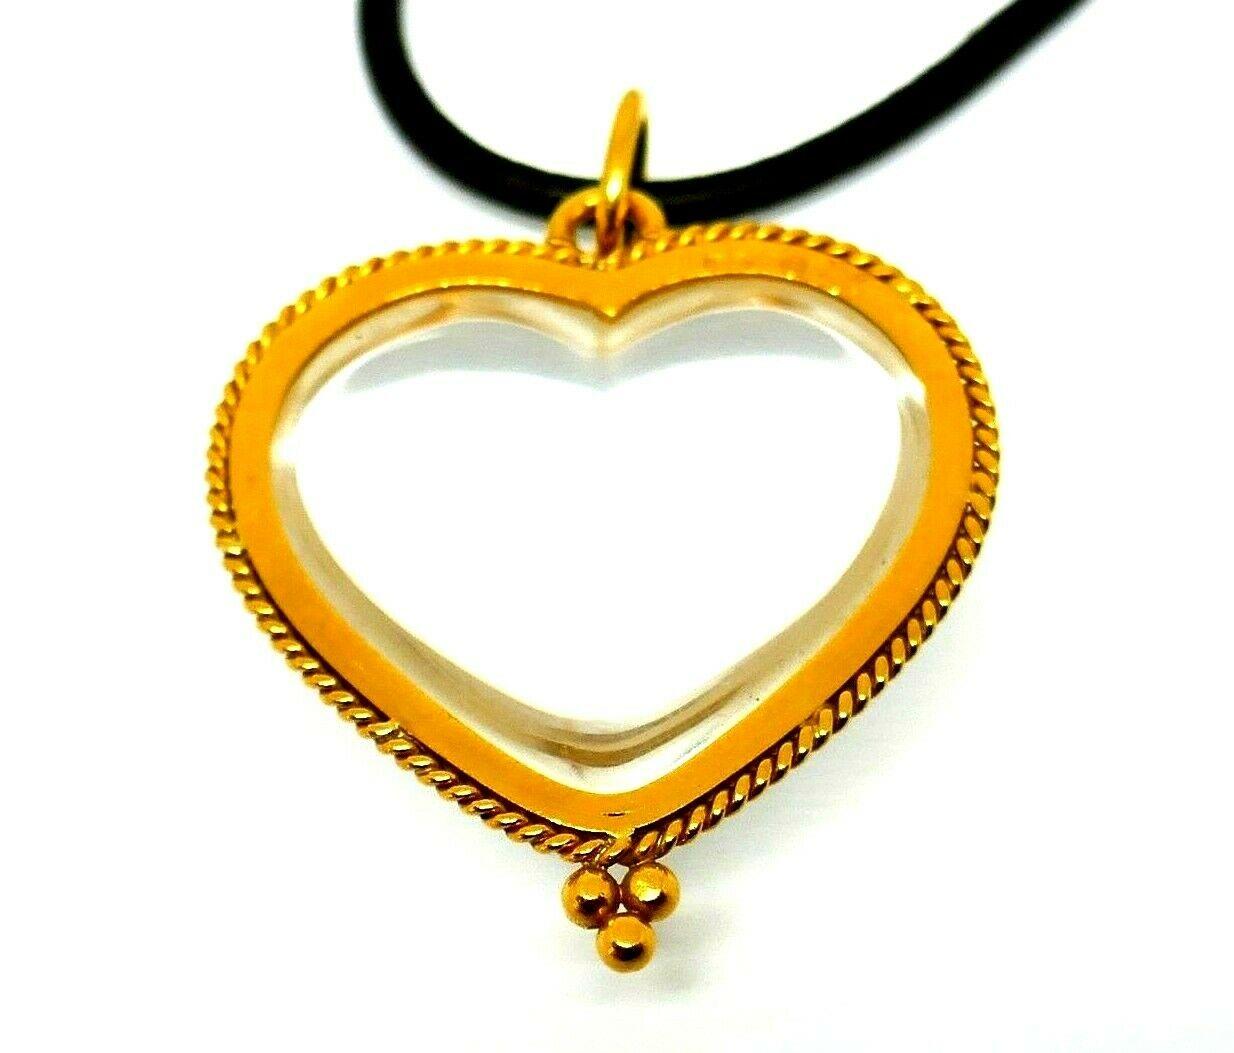 Leather cord necklace featuring a heart-shaped pendant, all by Temple St. Clair. The natural rock crystal heart is sitting in a braided 18k yellow gold frame. The color of the gold gives this piece a nice vintage touch. 
Stamped with the Temple St.